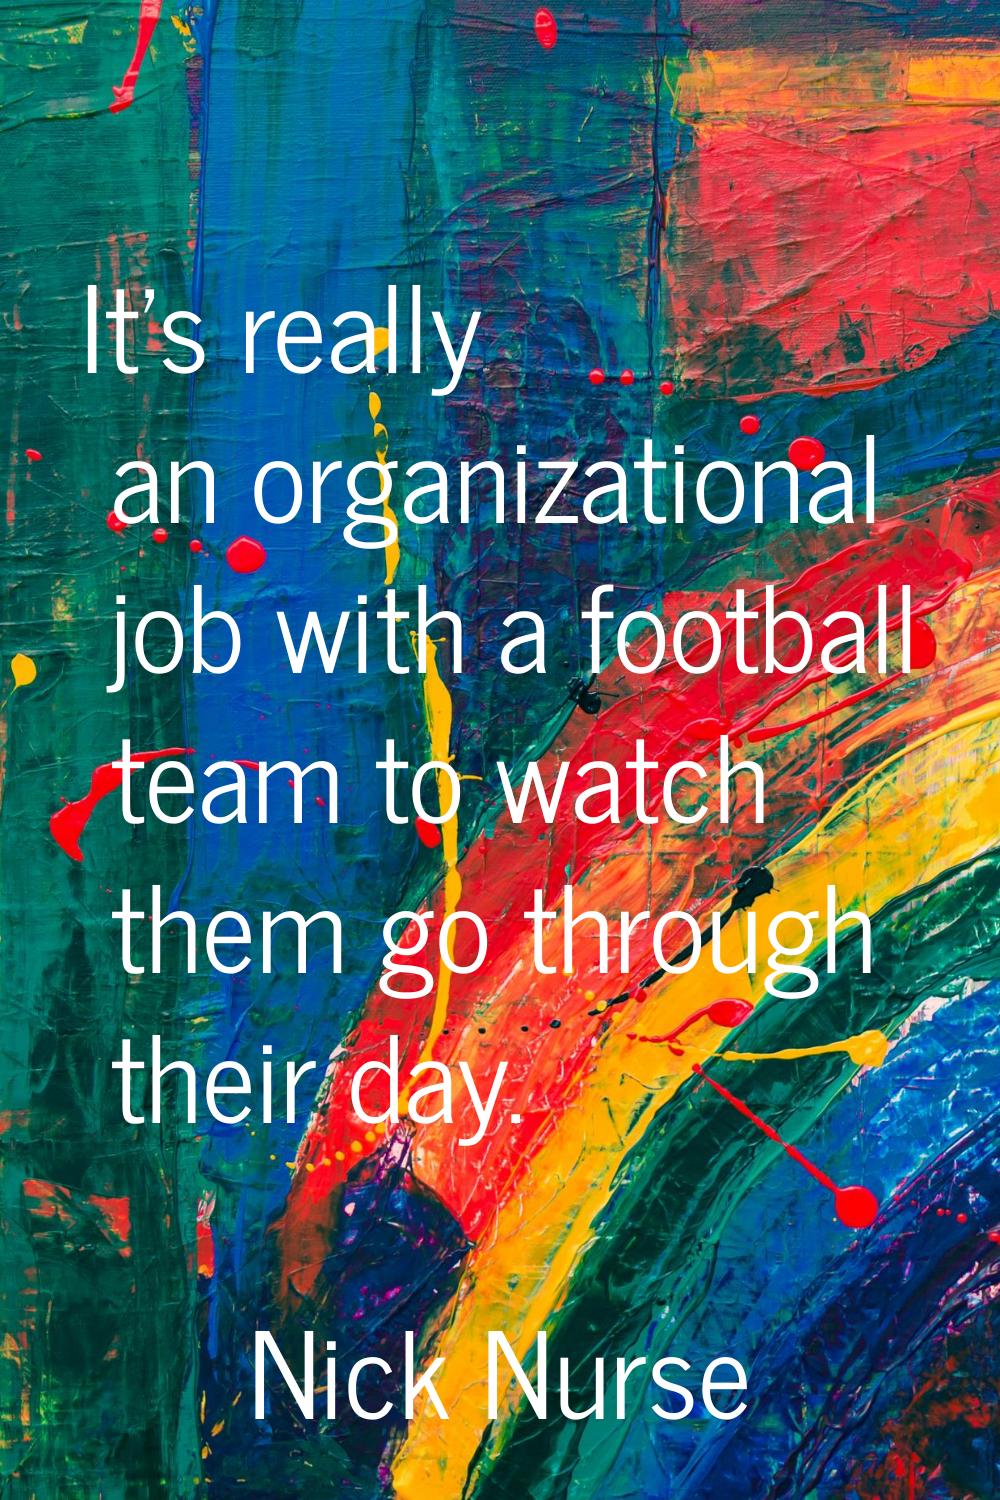 It's really an organizational job with a football team to watch them go through their day.